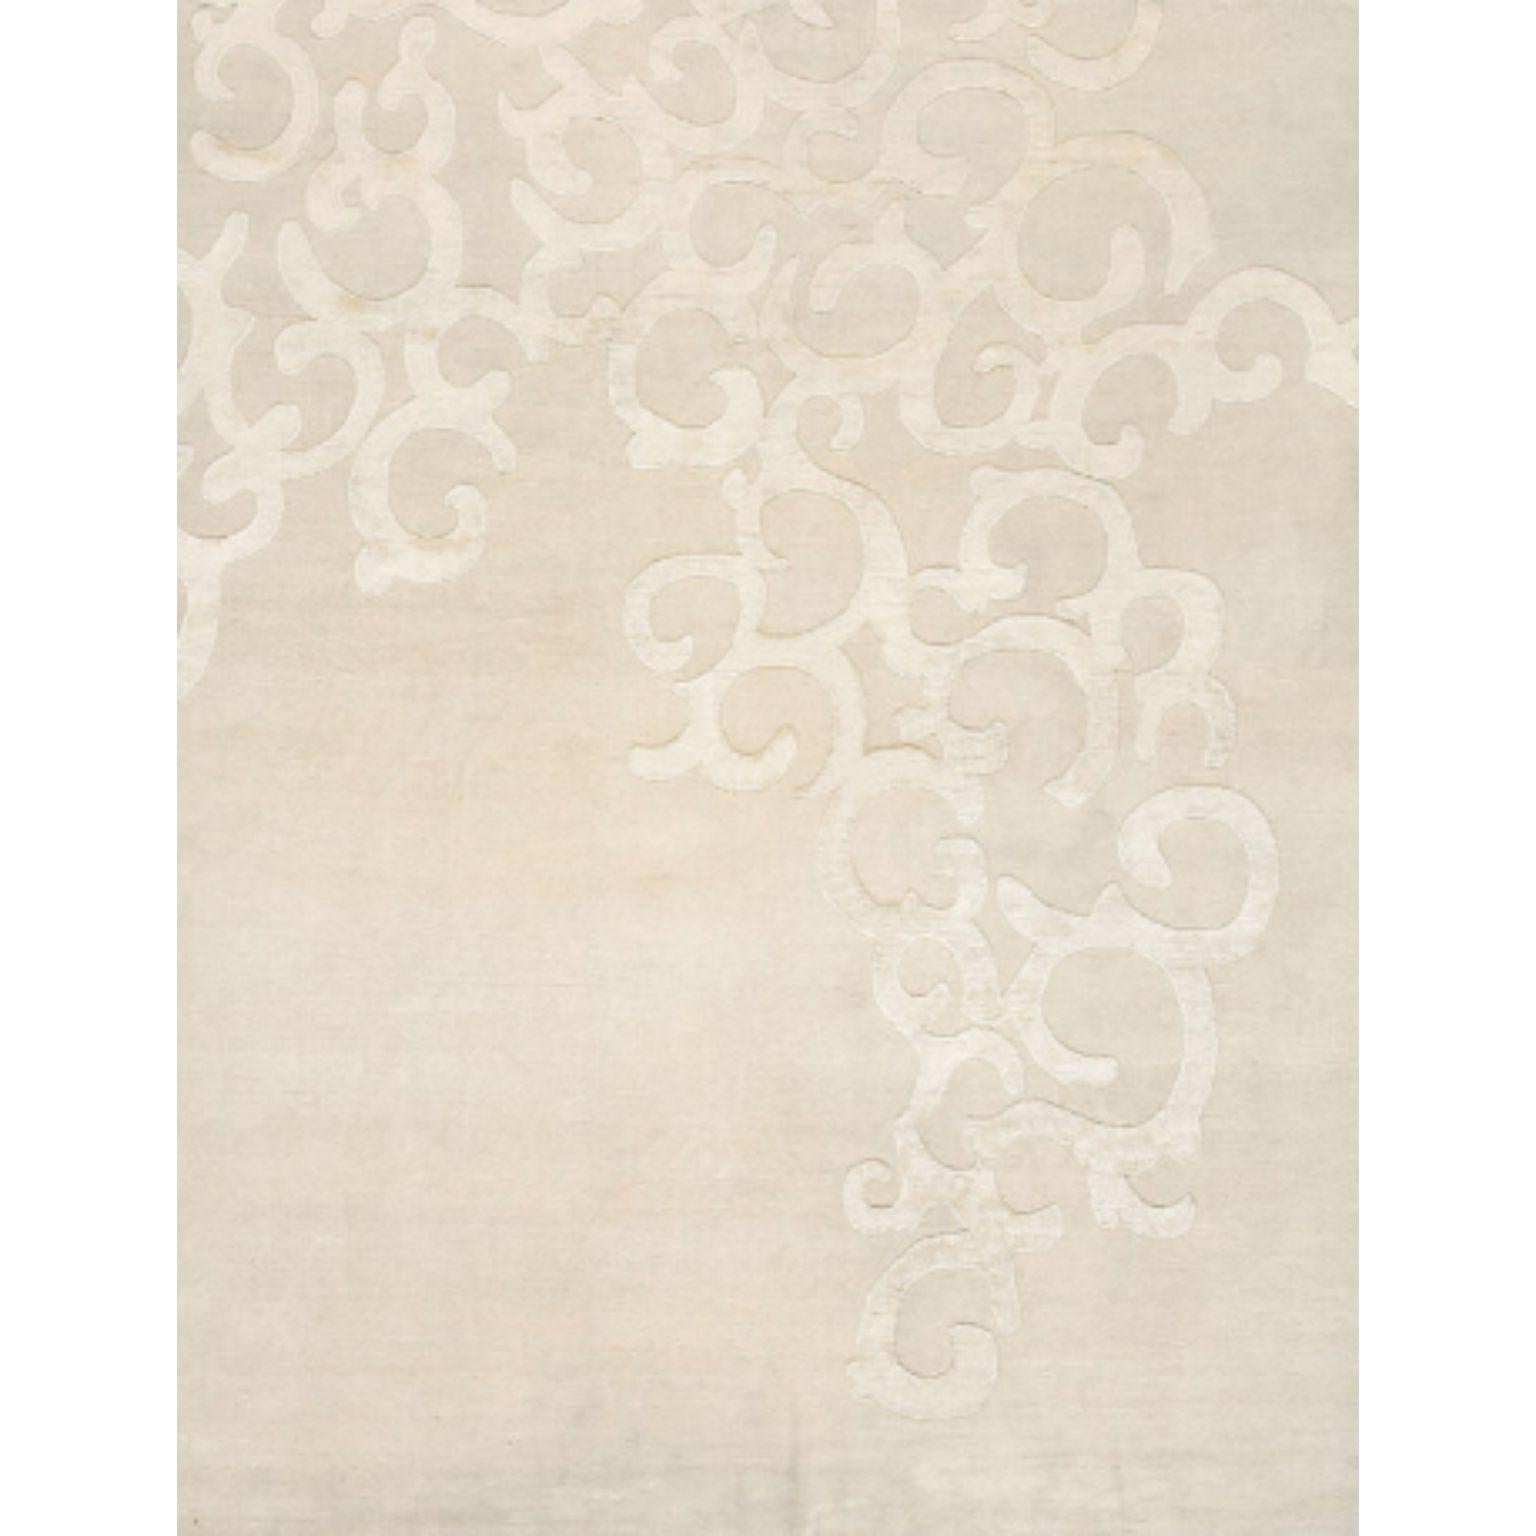 MEMENTO 200 rug by Illulian
Dimensions: D300 x H200 cm 
Materials: Wool 50% , Silk 50%
Variations available and prices may vary according to materials and sizes.

Illulian, historic and prestigious rug company brand, internationally renowned in